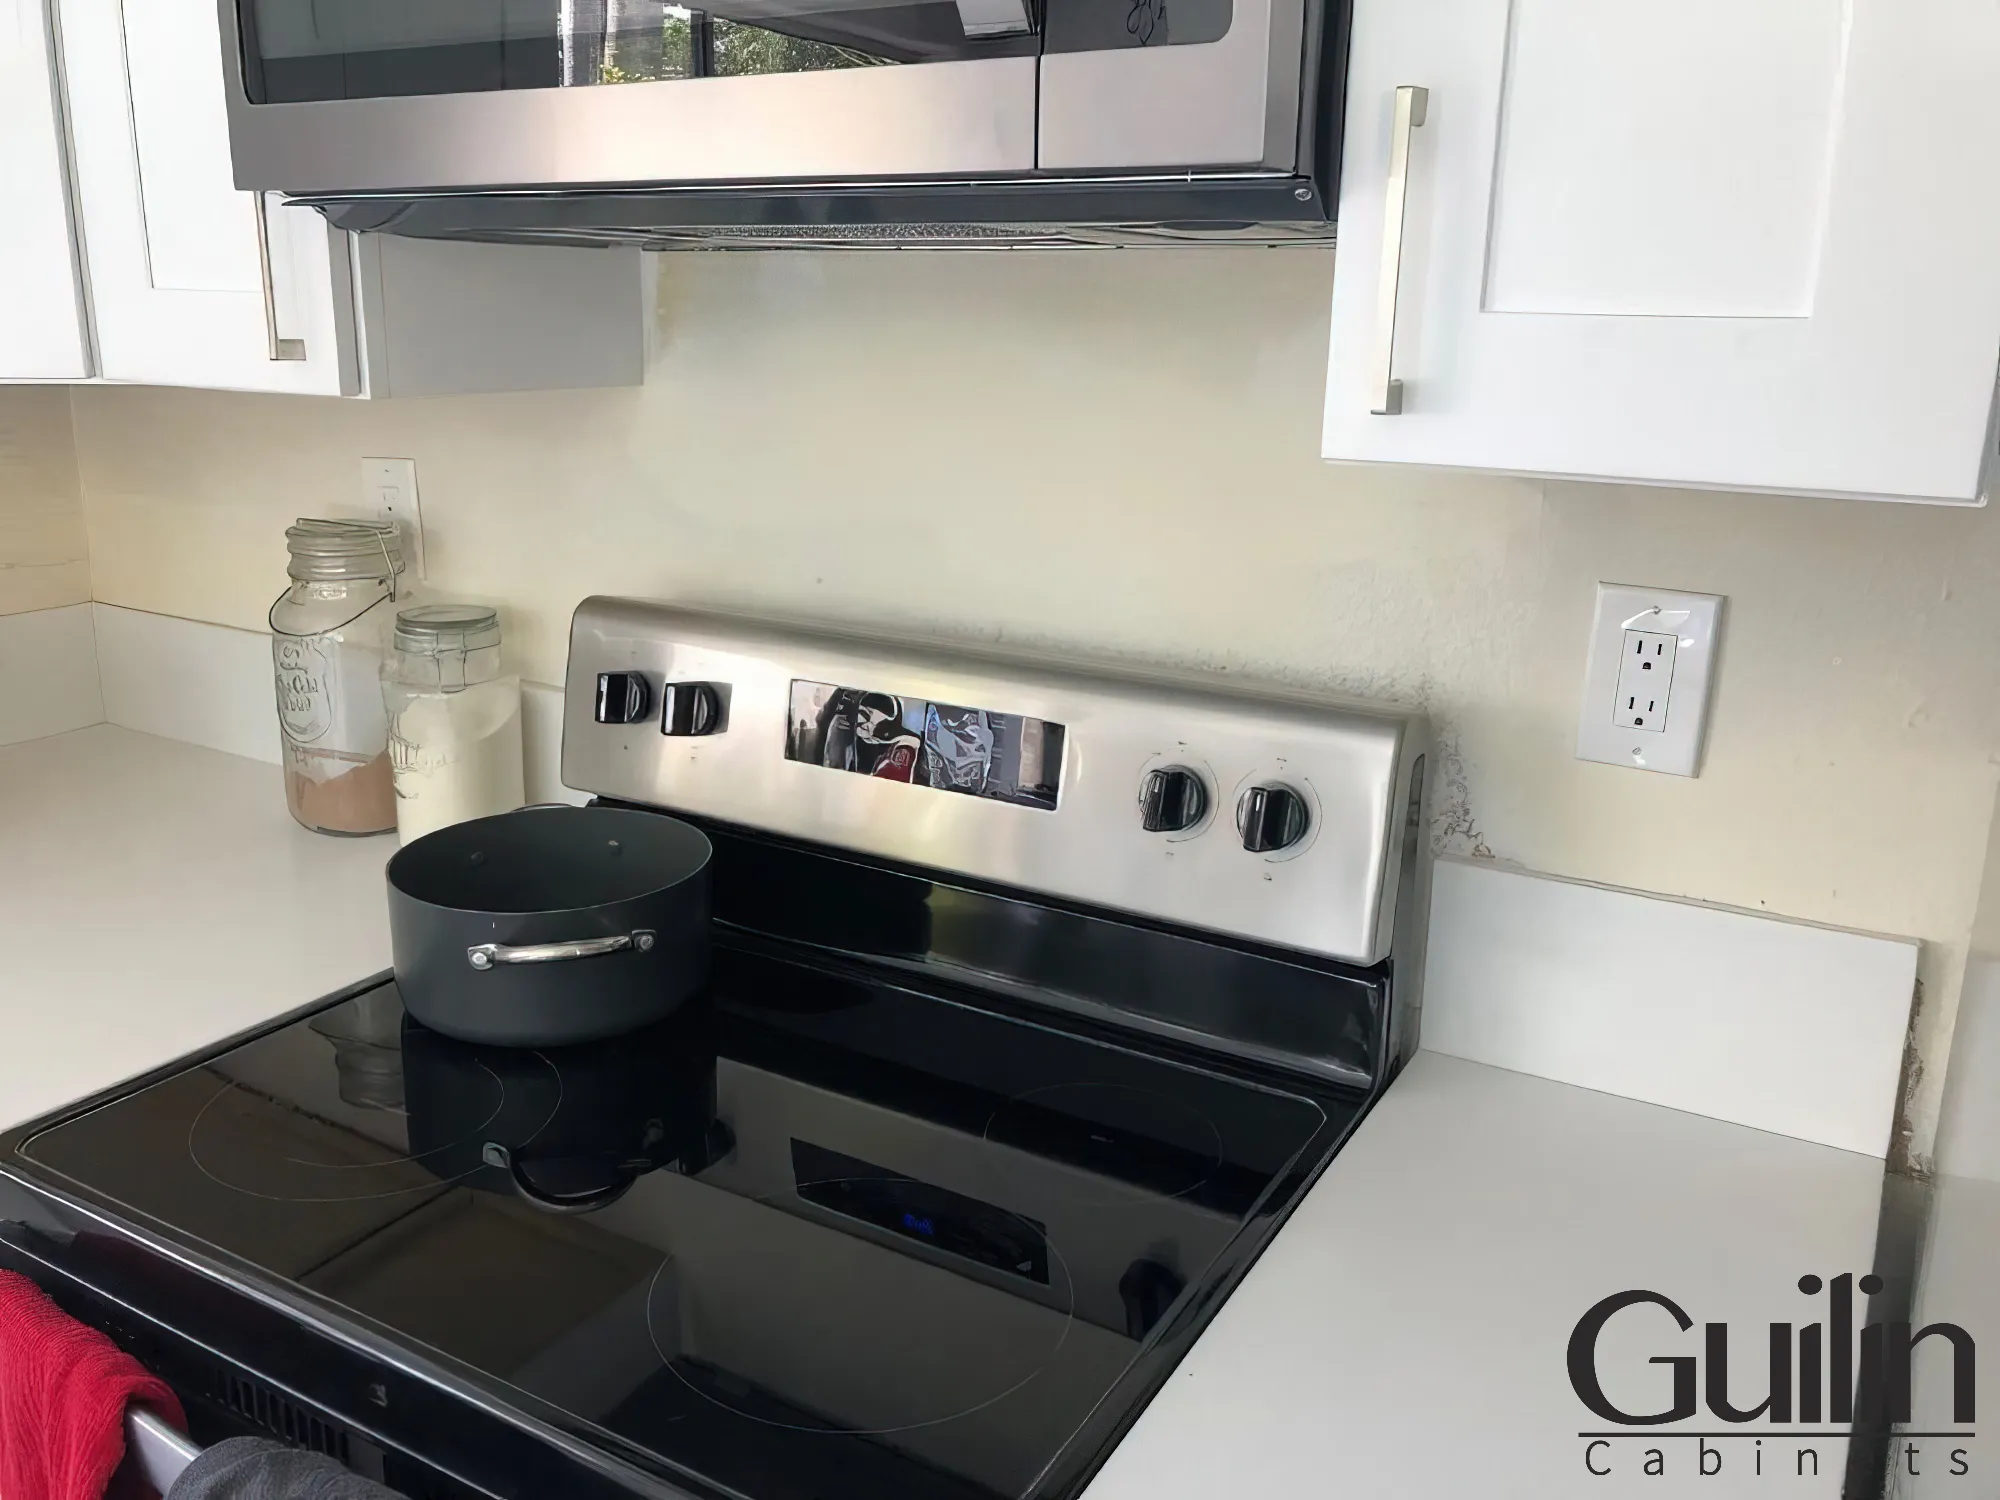 Kitchen Remodel By Guilin Cabinets Fast & Easy Service Redondo Beach, CA